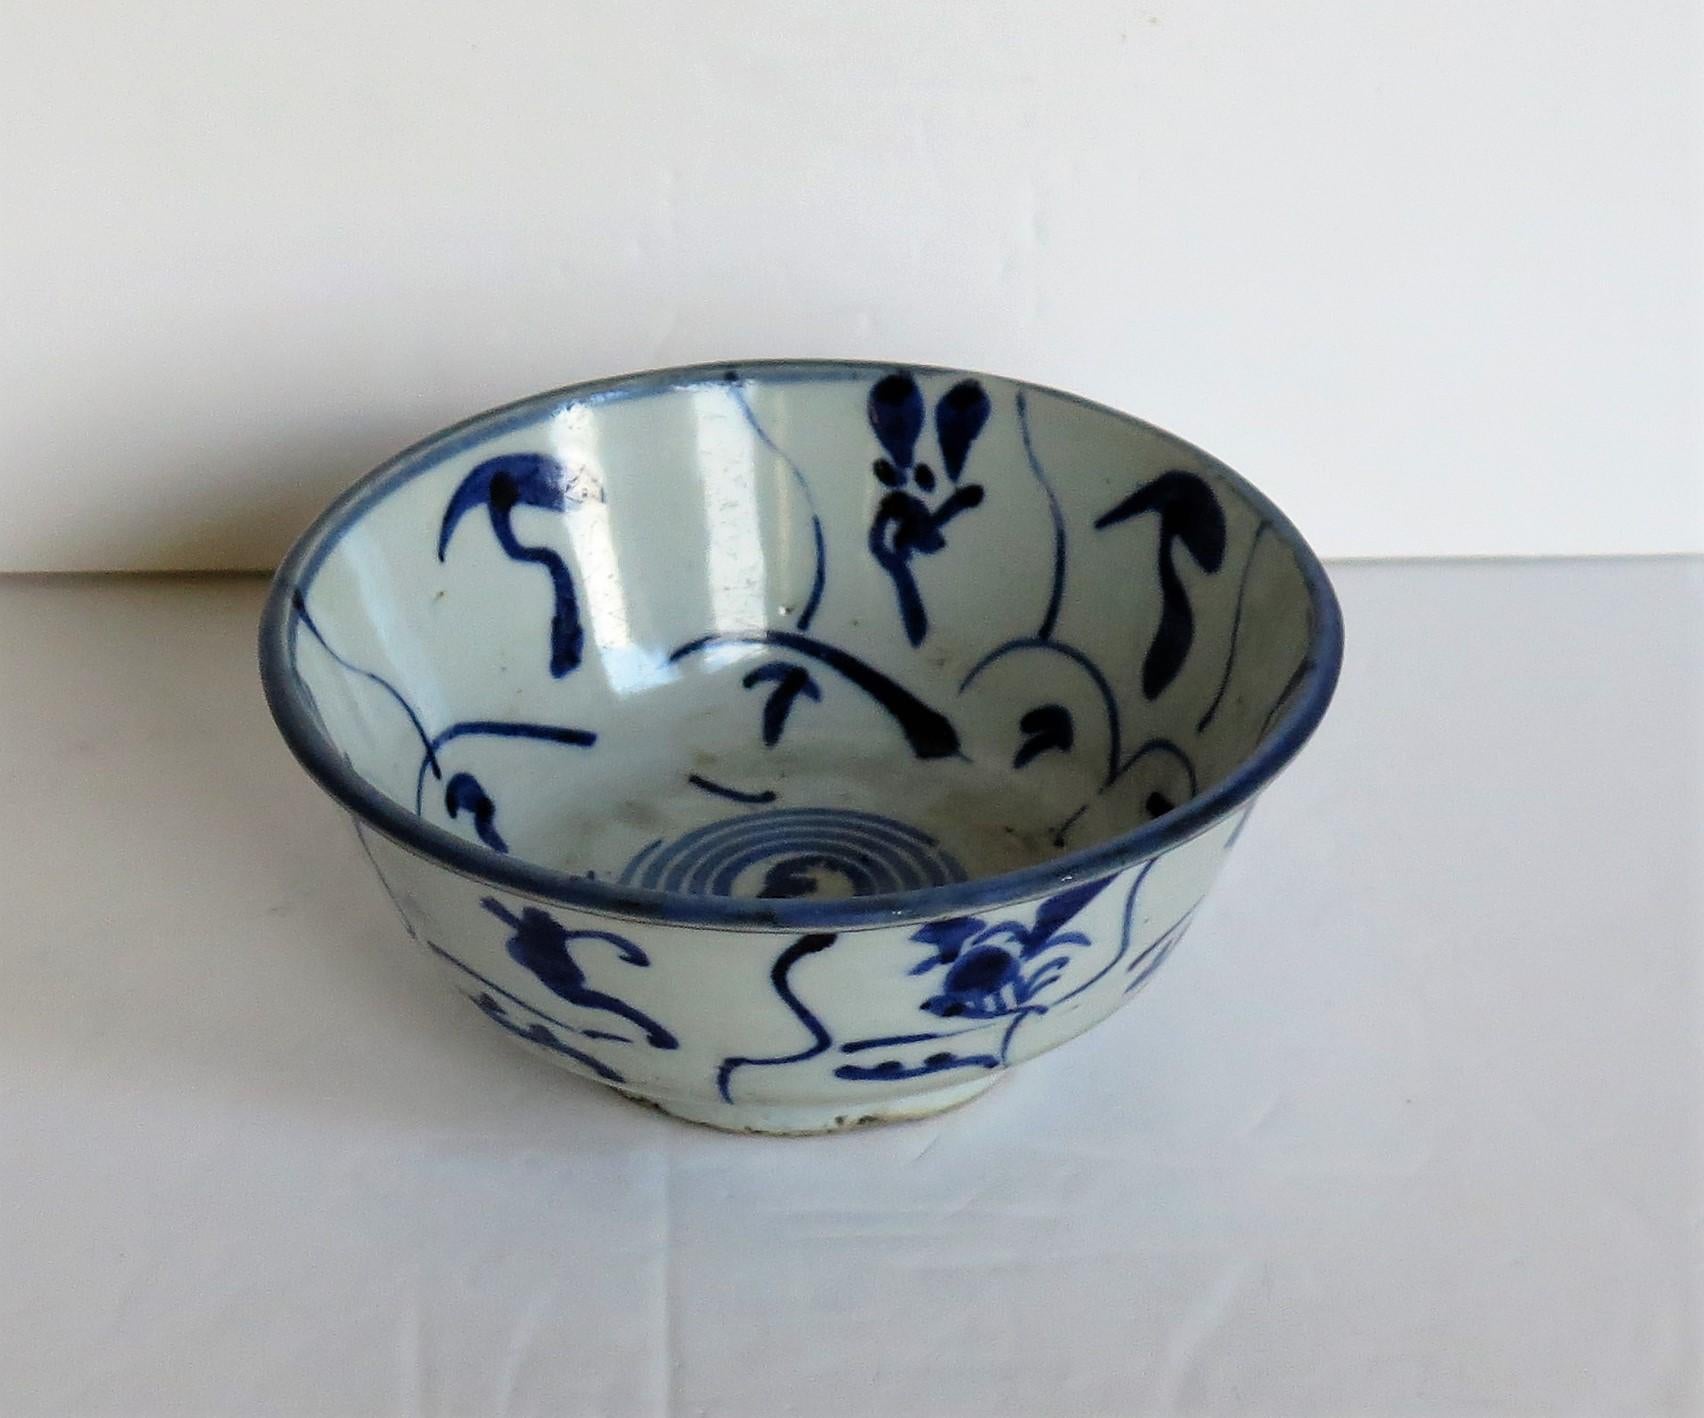 This is a hand painted Chinese Export porcelain bowl, which we date to the 17th century, Ming Dynasty. 

The bowl is fairly thickly potted with a fairly high, slightly undercut foot and an everted rim.

The bowl is decorated inside and outside,